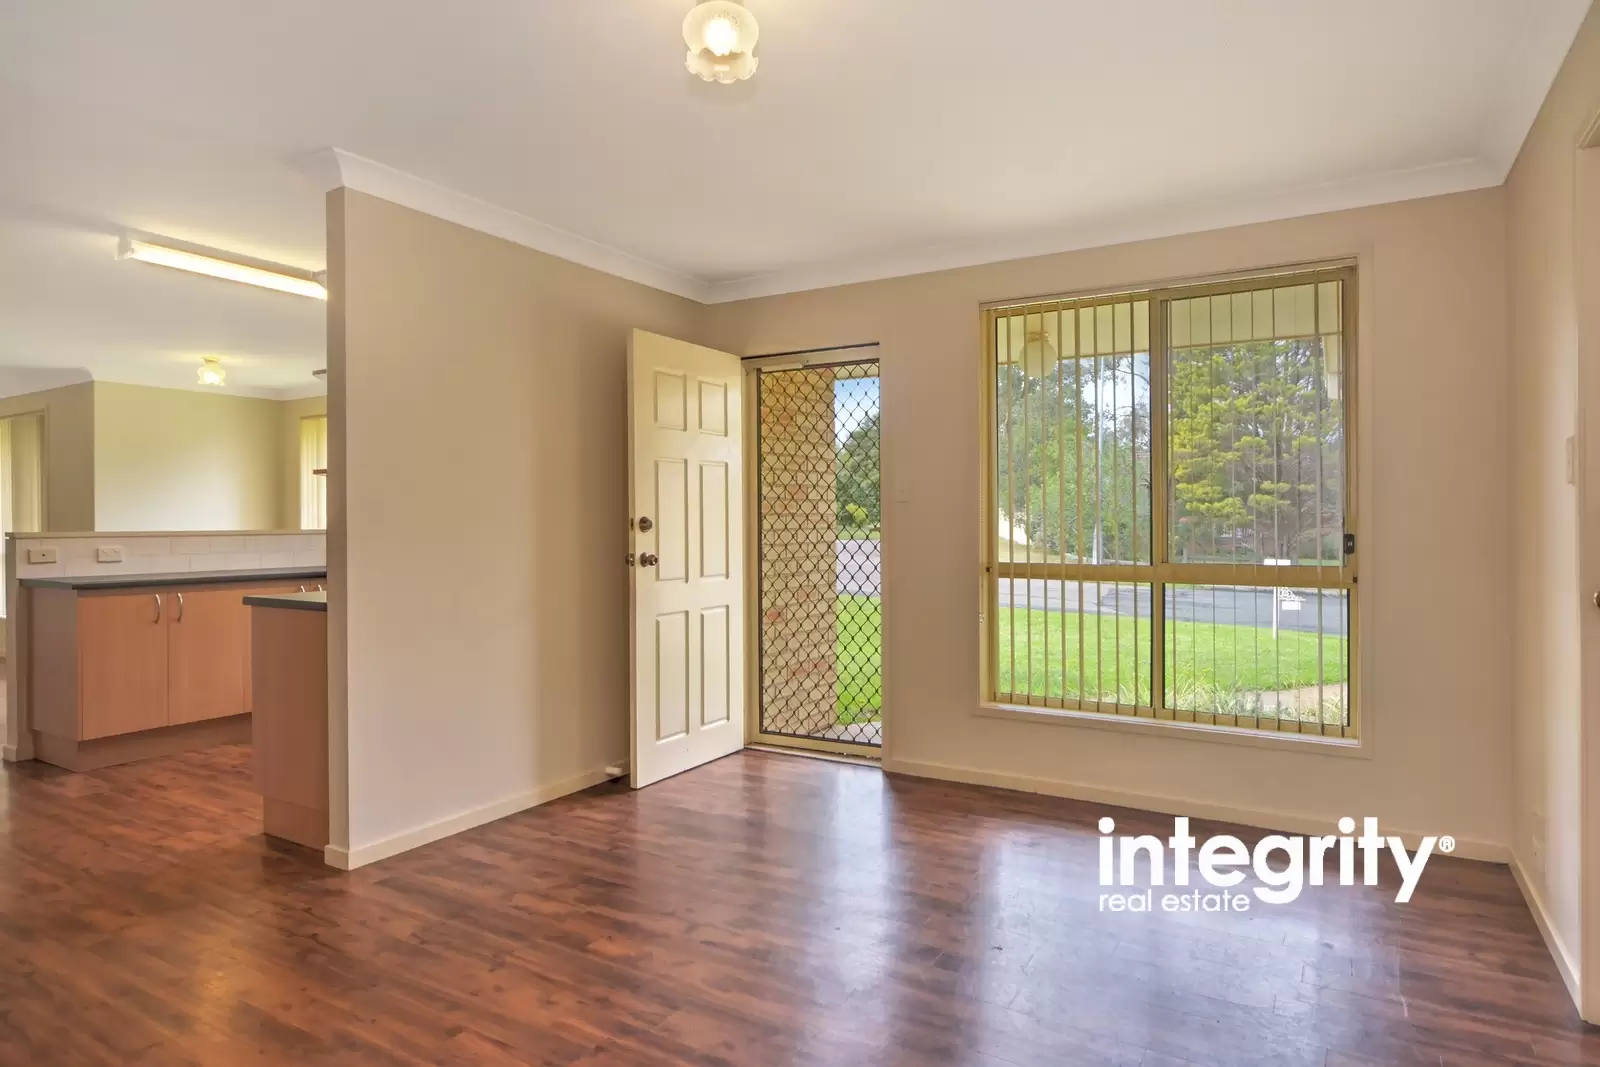 32 Condie Crescent, North Nowra Sold by Integrity Real Estate - image 2